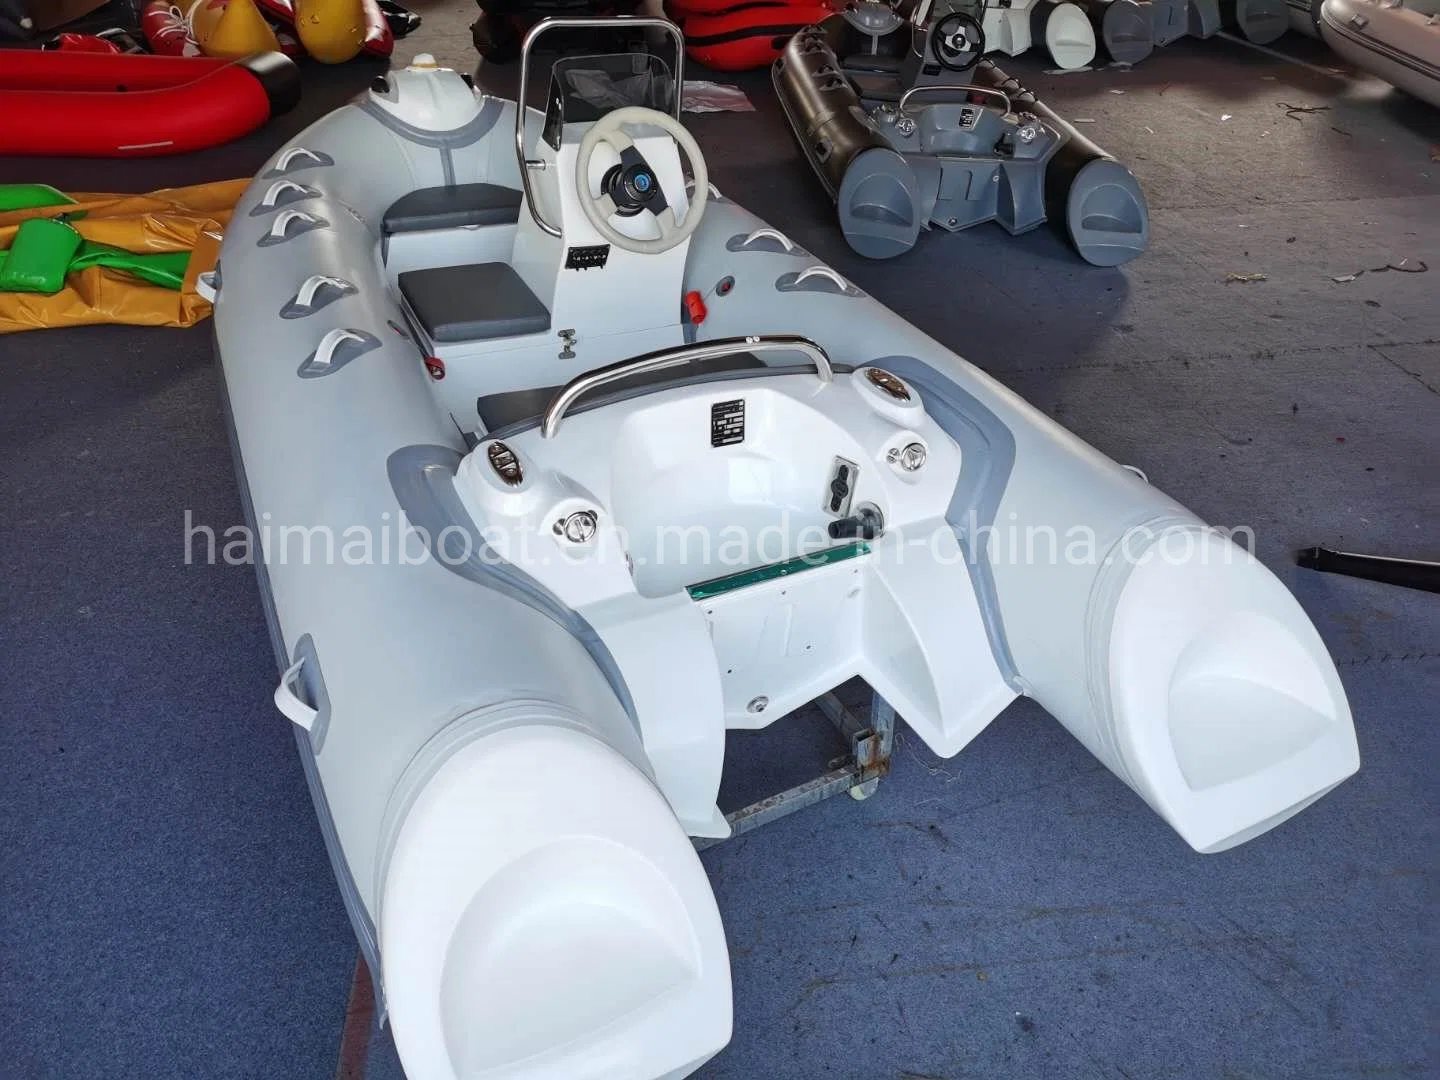 China Hot Sale Water Sport Product 11.8feet 3.6m Fiberglass Rigid Hull Inflatable PVC Boat Orca Hypalon Sport Boat Line Fishing Boat Fishing Dinghy Ferry Boat